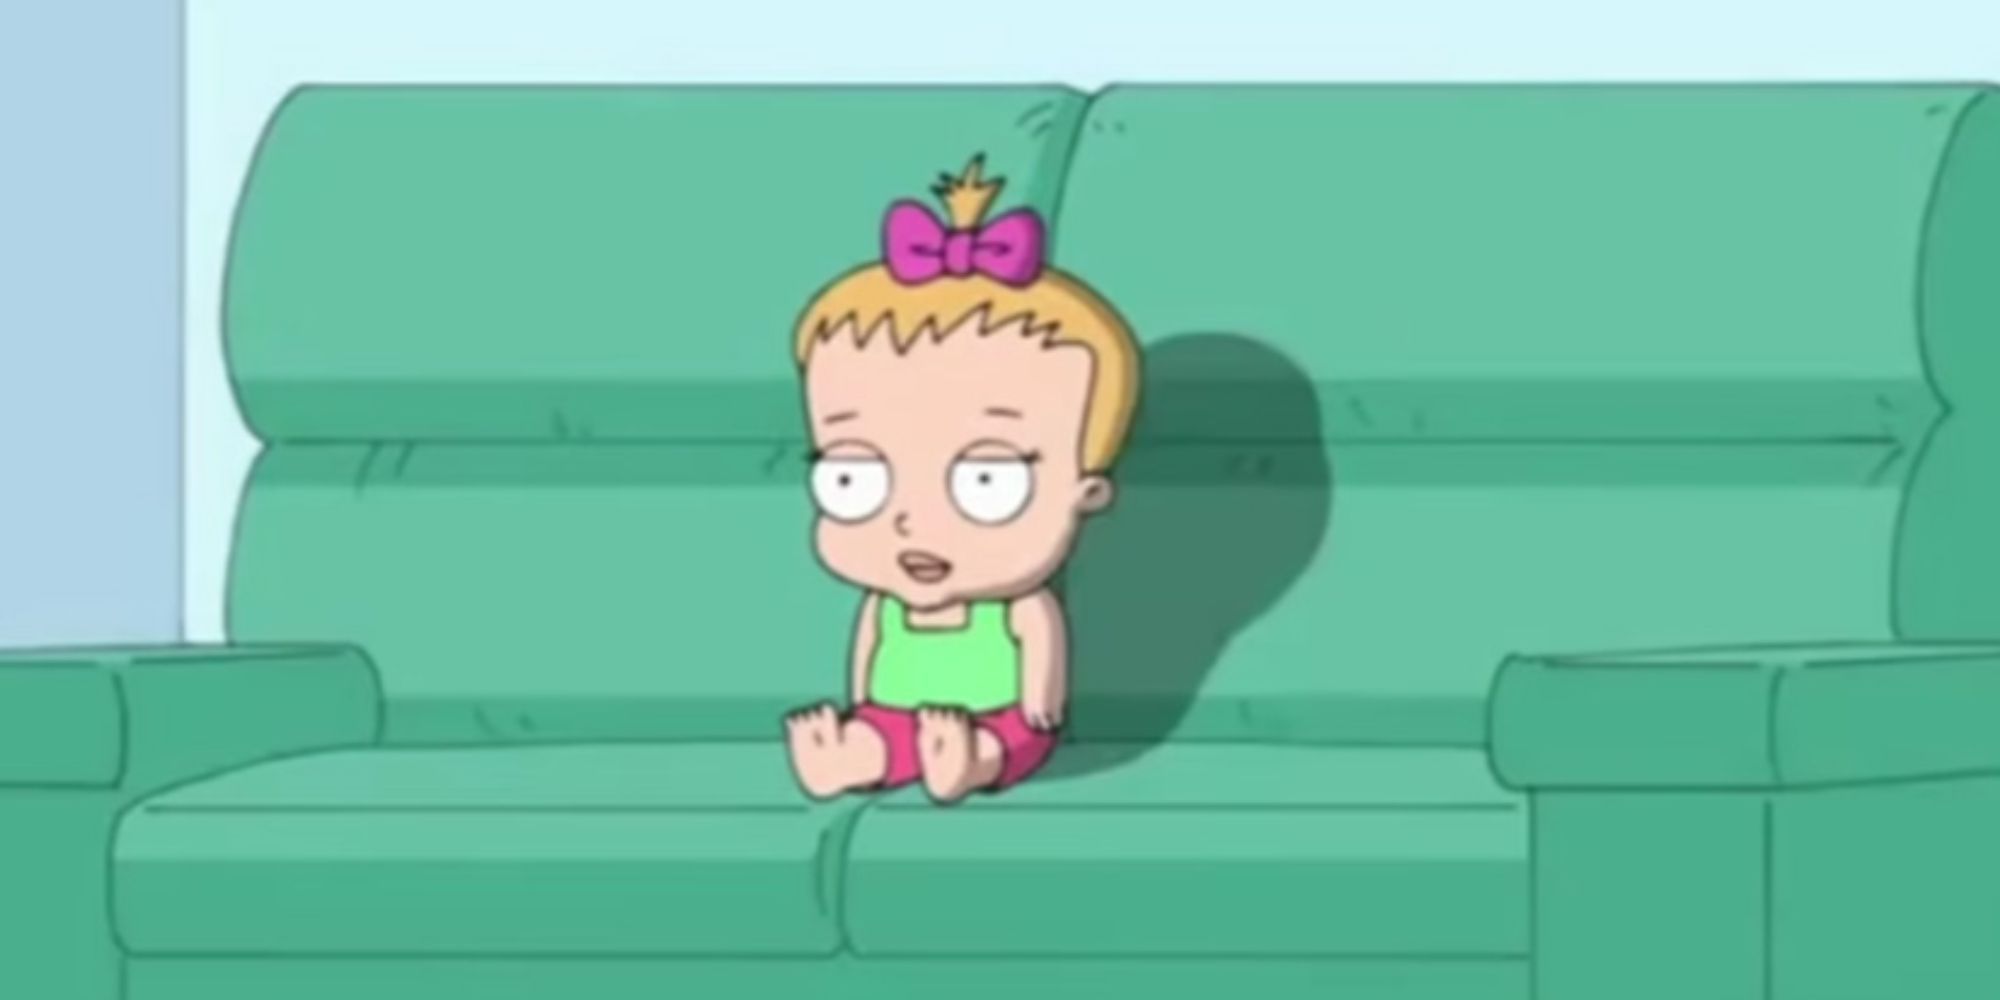 Susie Swanson sitting on a couch watching TV in Family Guy